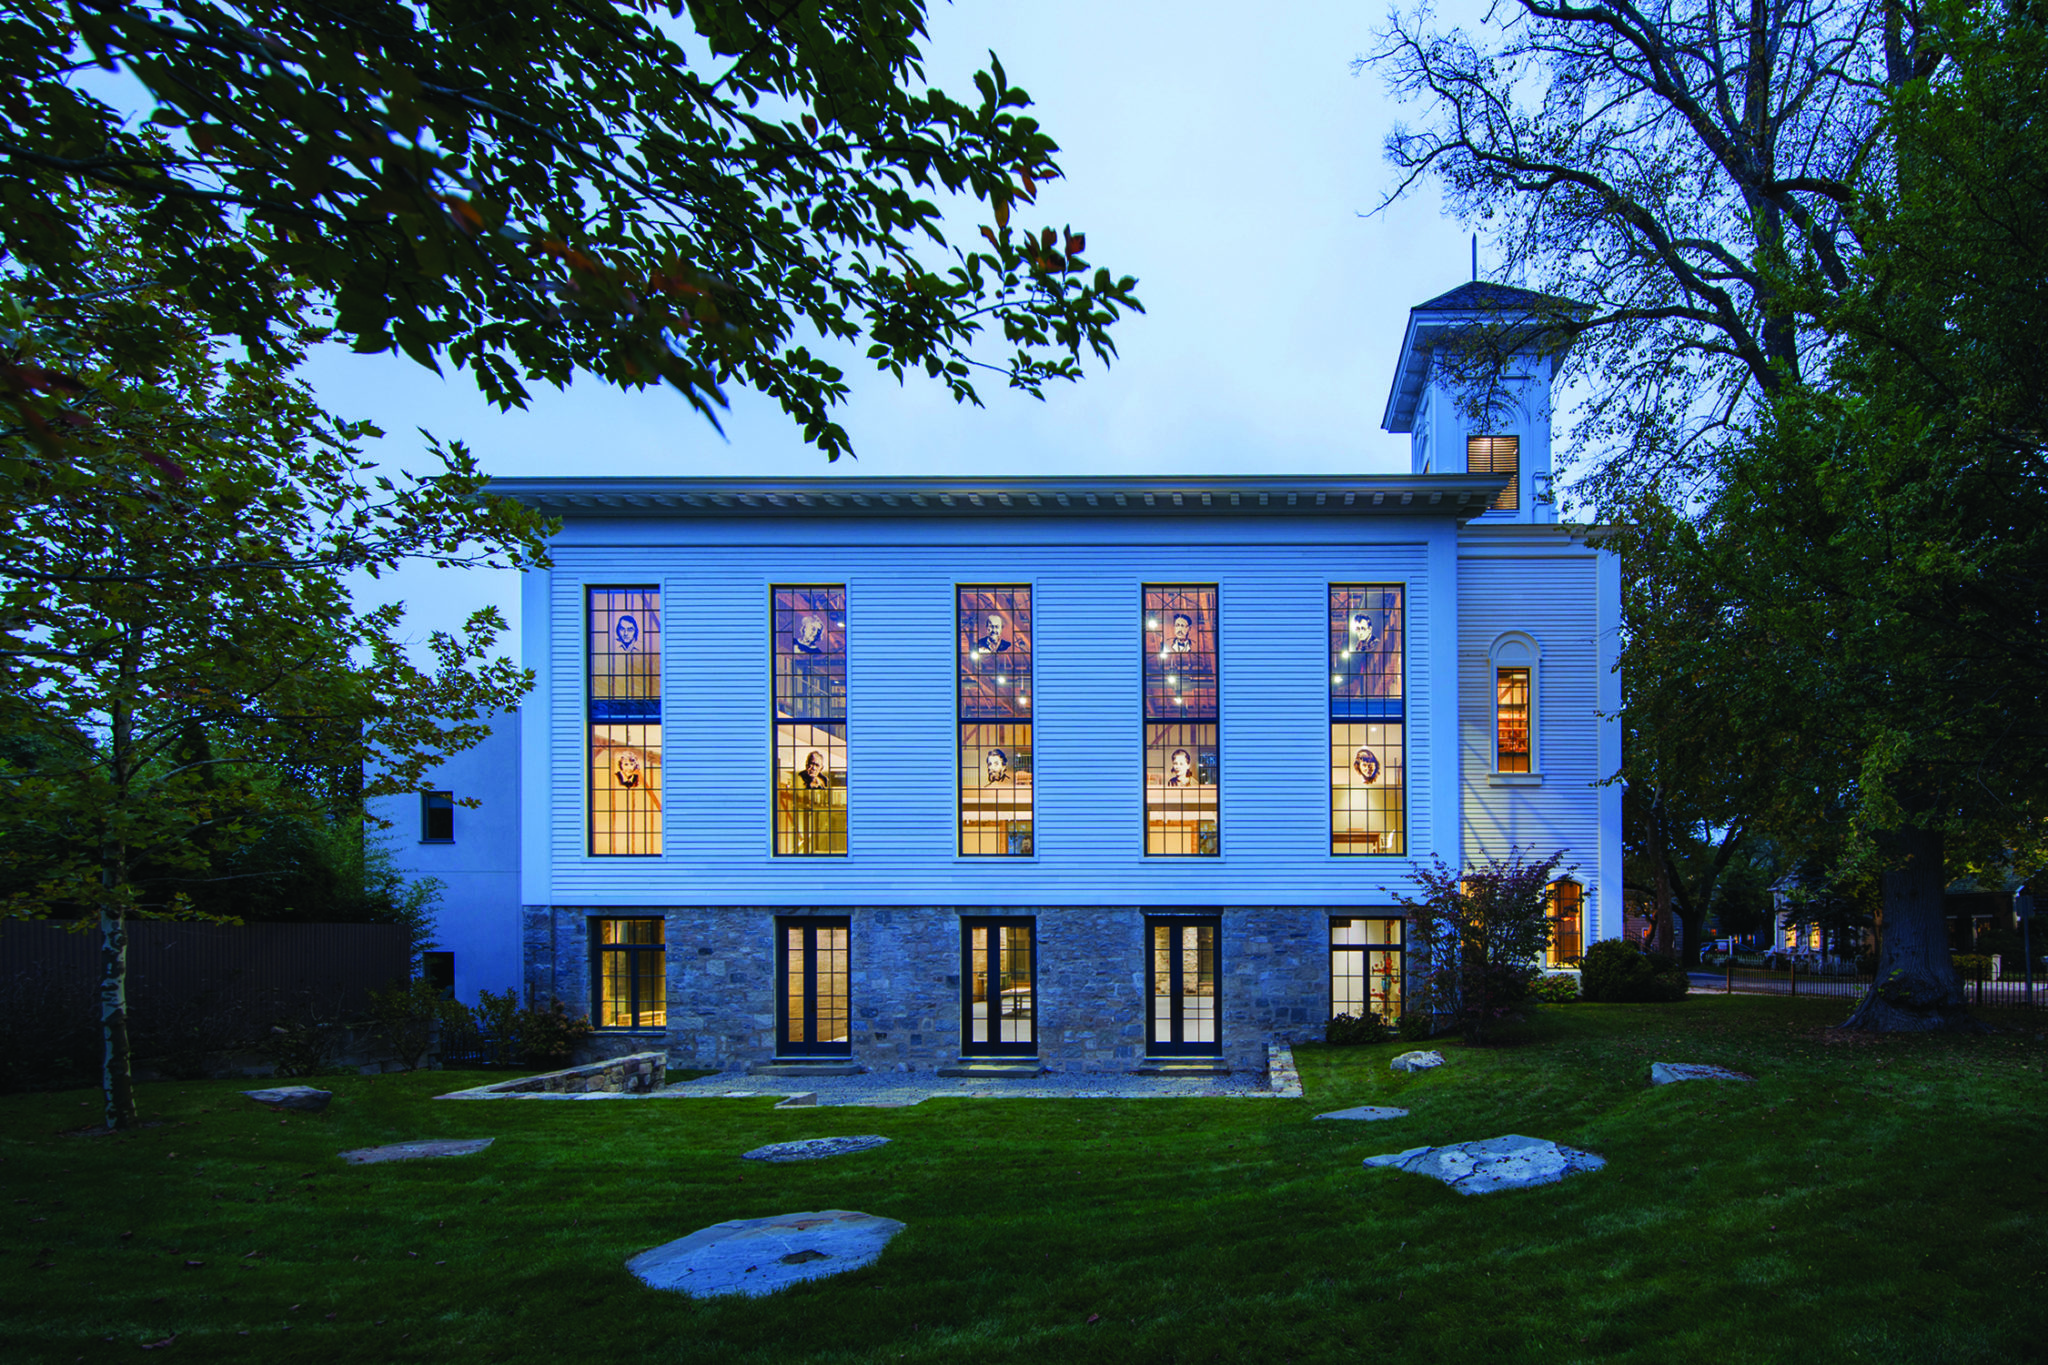 The Church in Sag Harbor: A Repurposed 1836 Sanctuary, Now an Arts Center